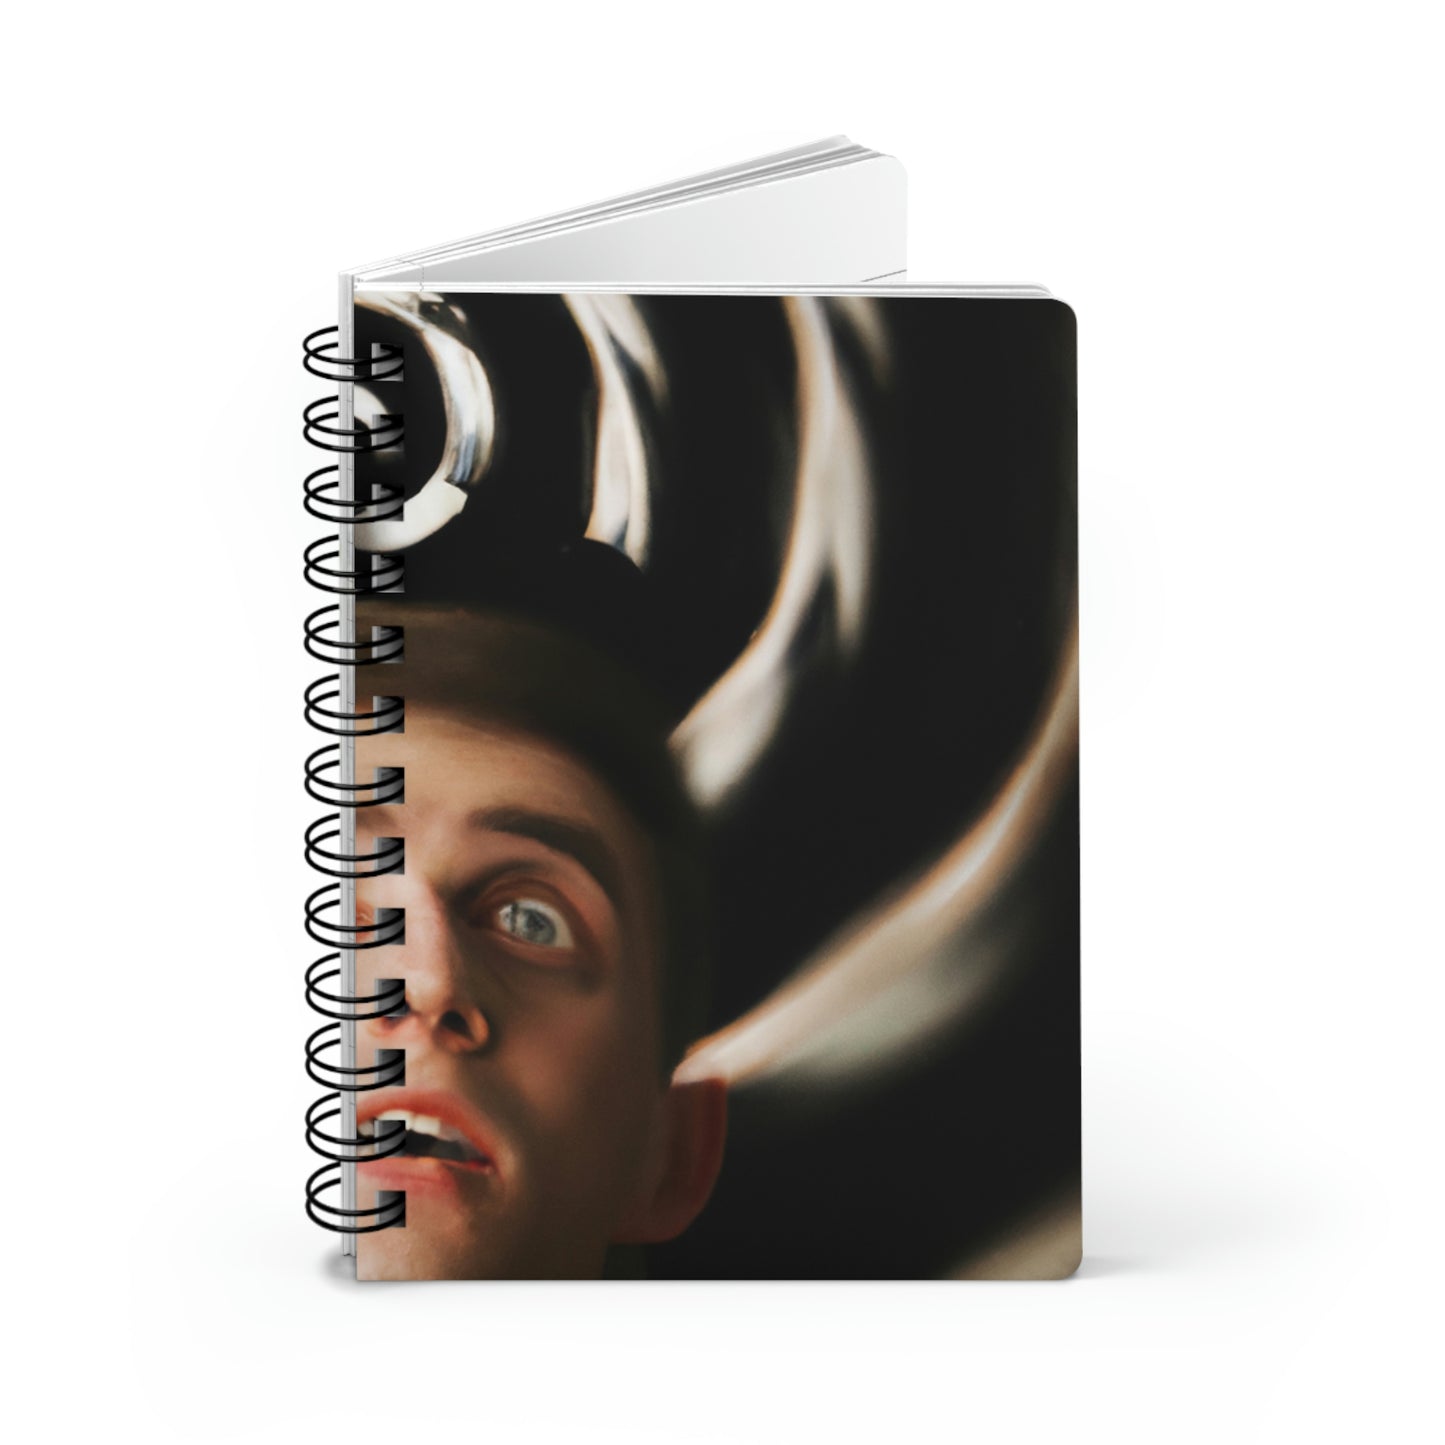 The Endless Nightmare - The Alien Spiral Bound Journal